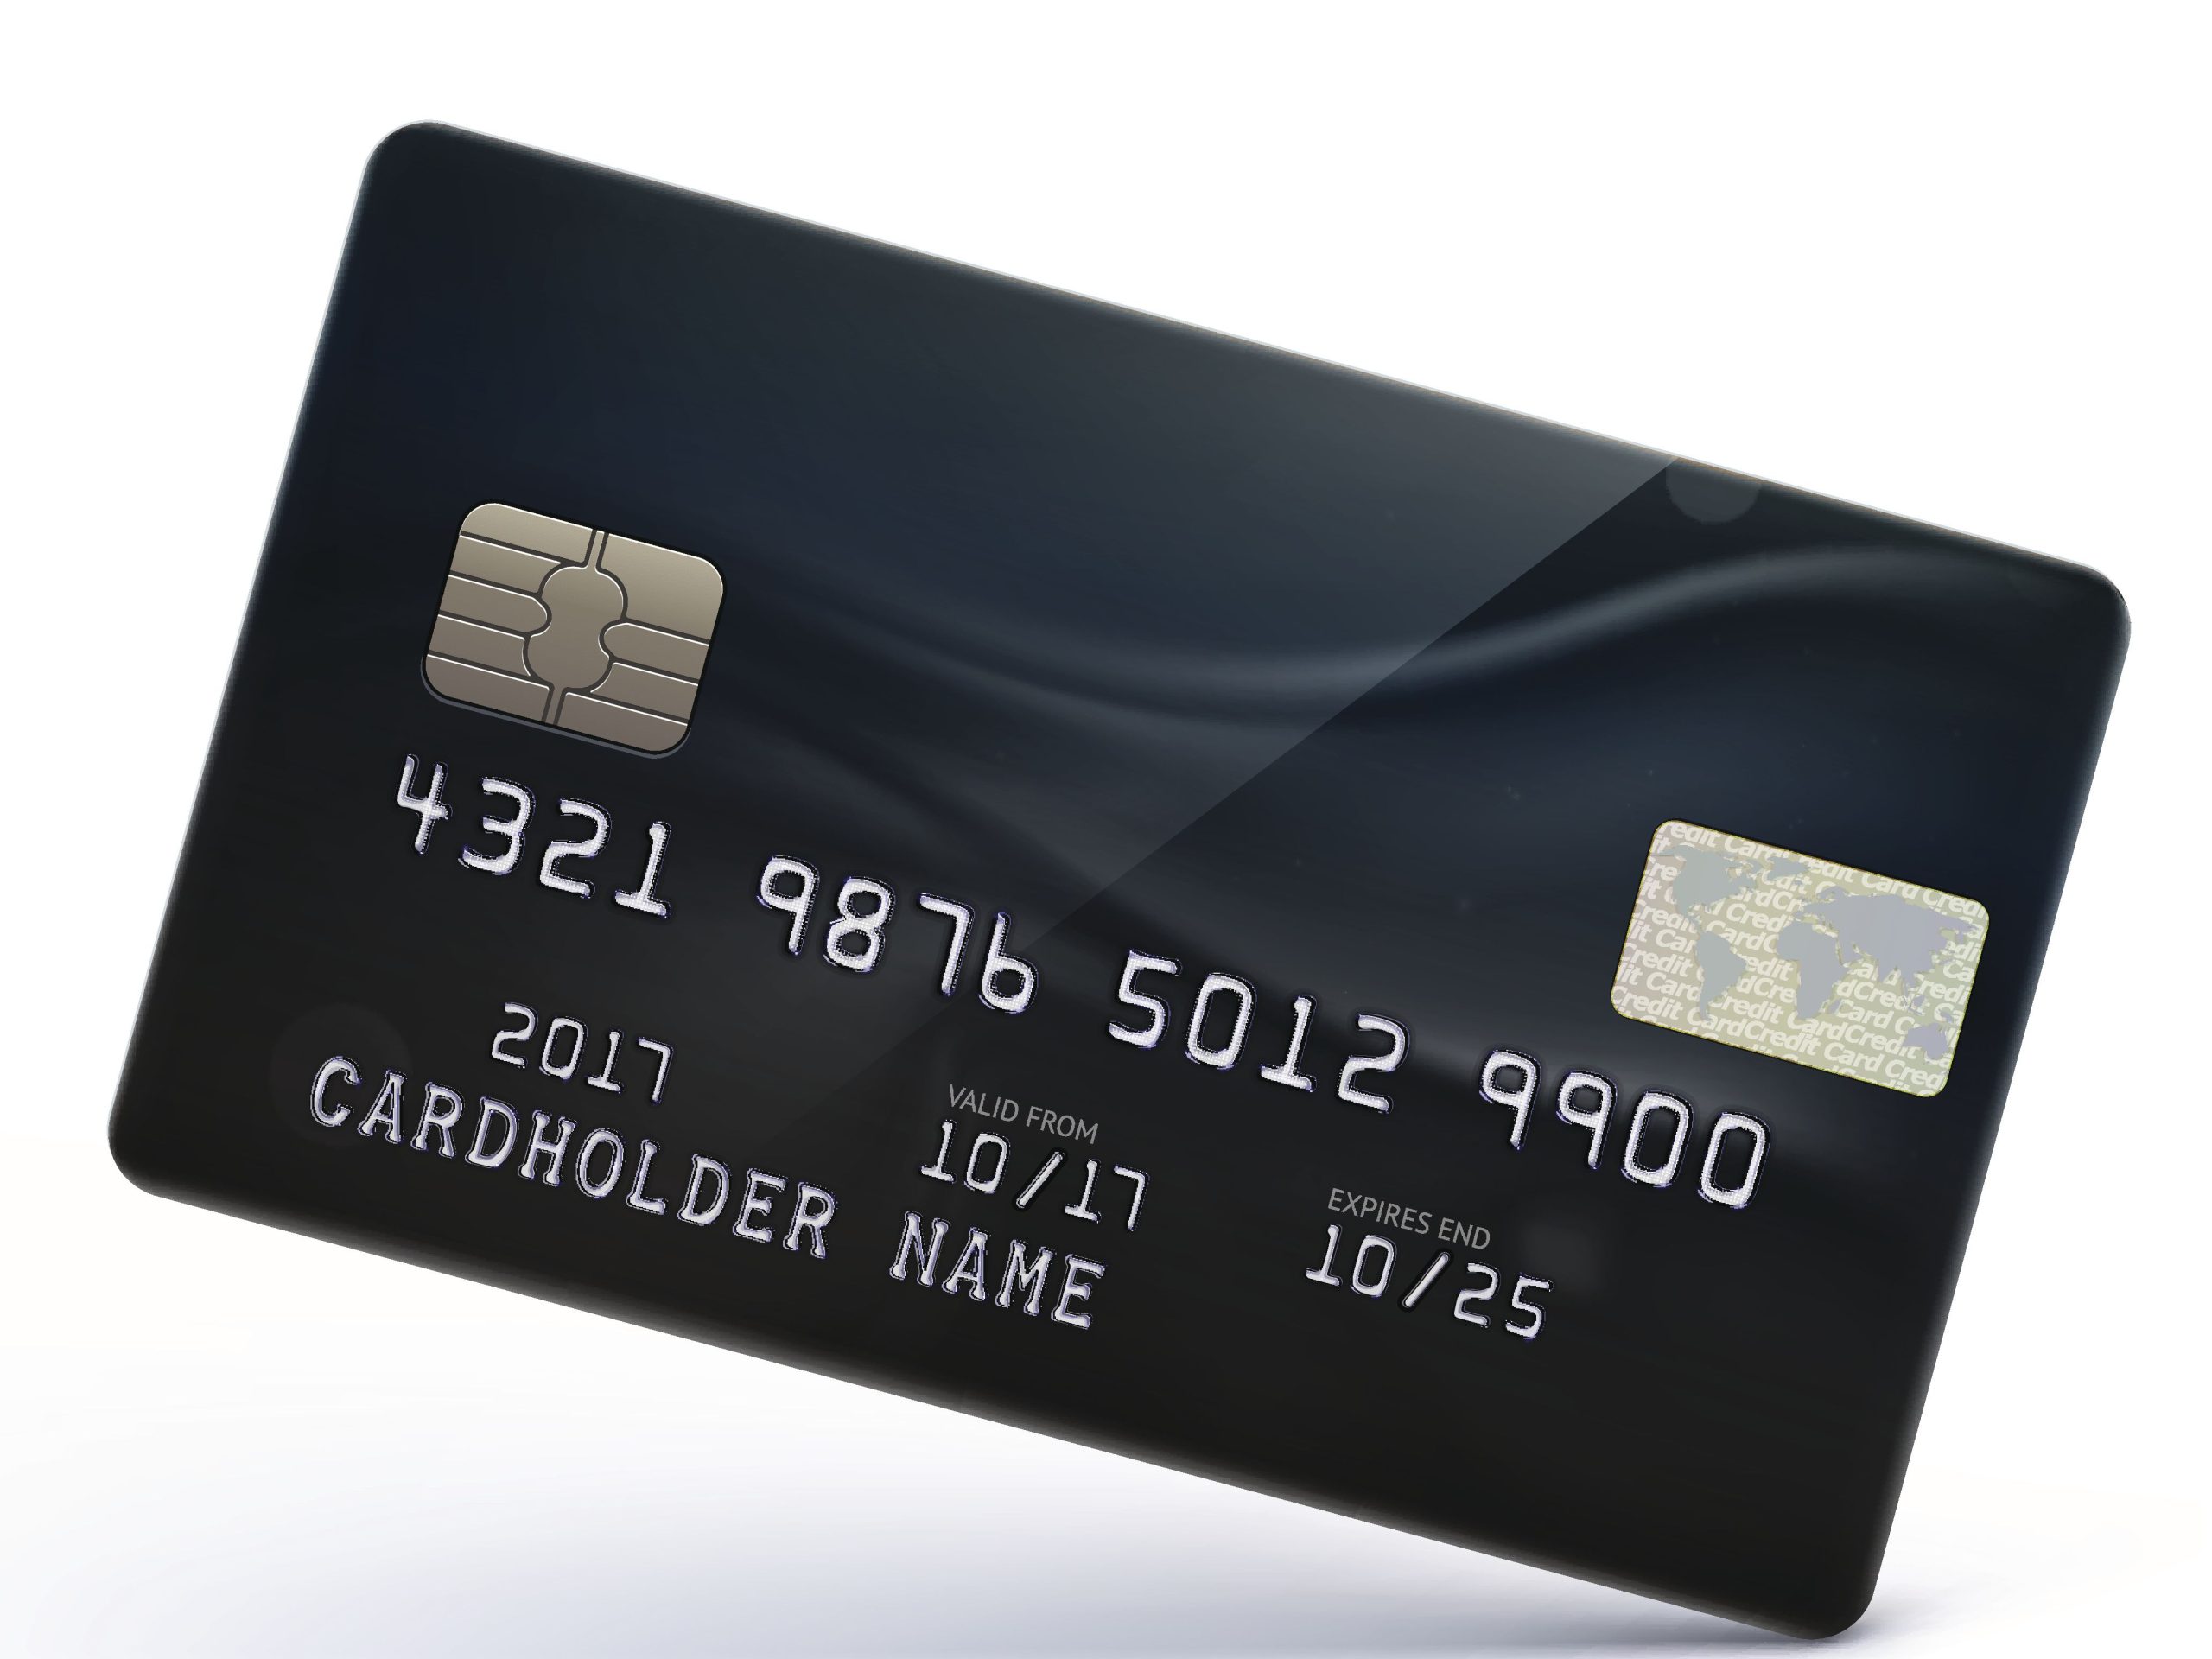 How Can MCP Credit Card Discount Offer Help You?